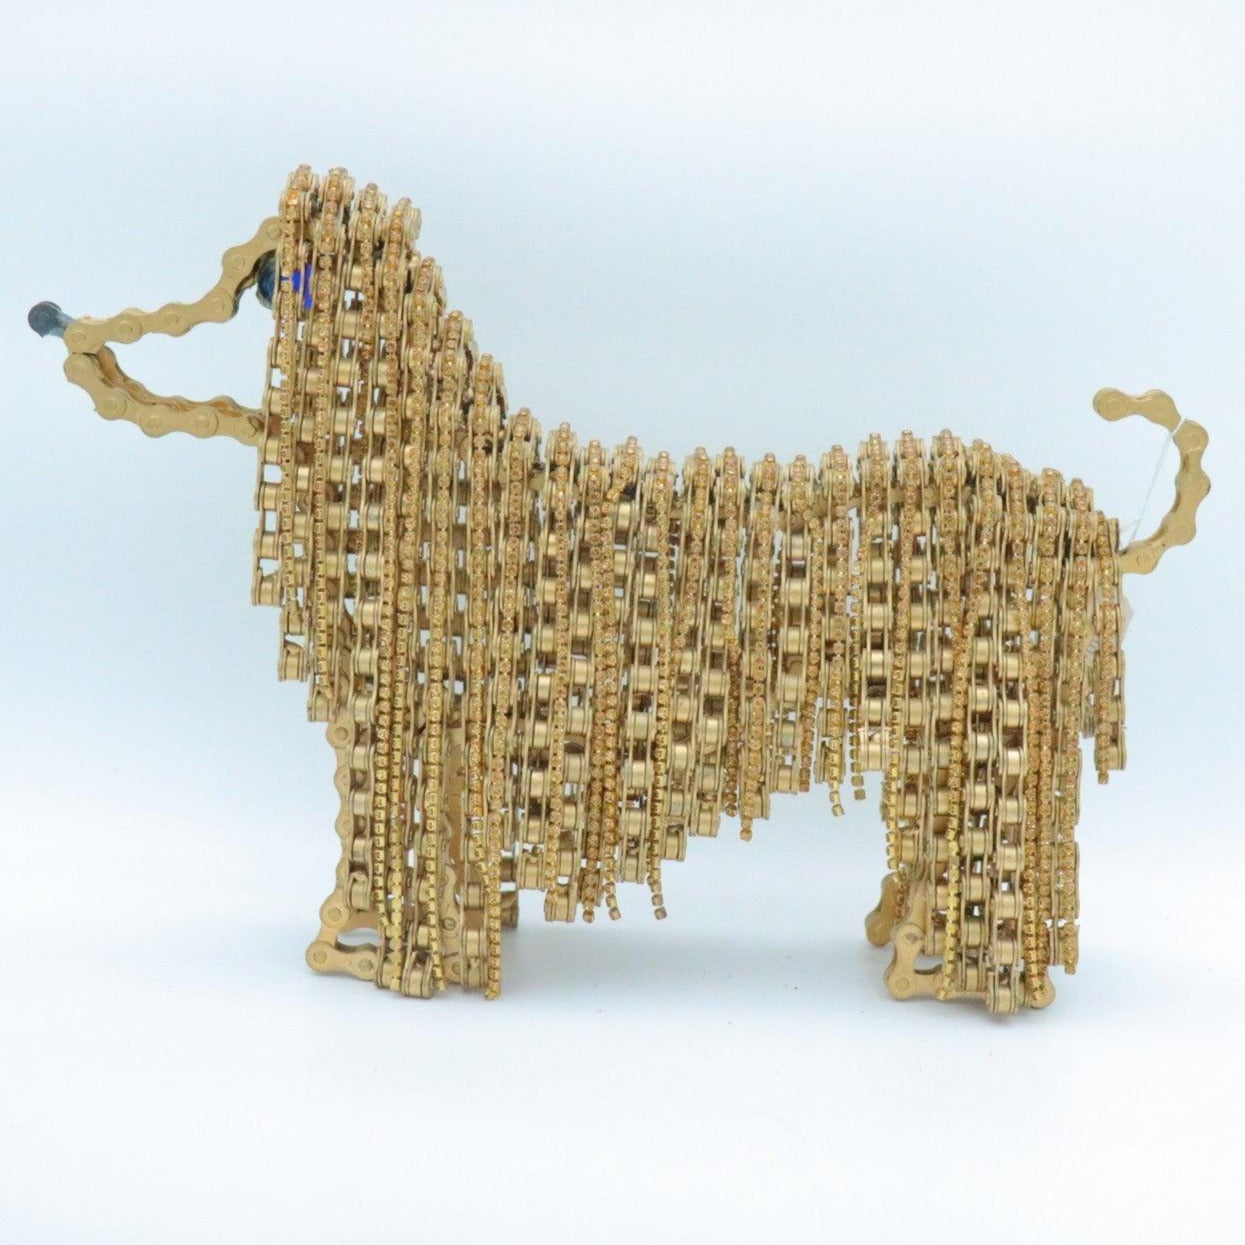 Afghan Hound Dog Sculpture (Princess) | UNCHAINED by NIRIT LEVAV PACKER